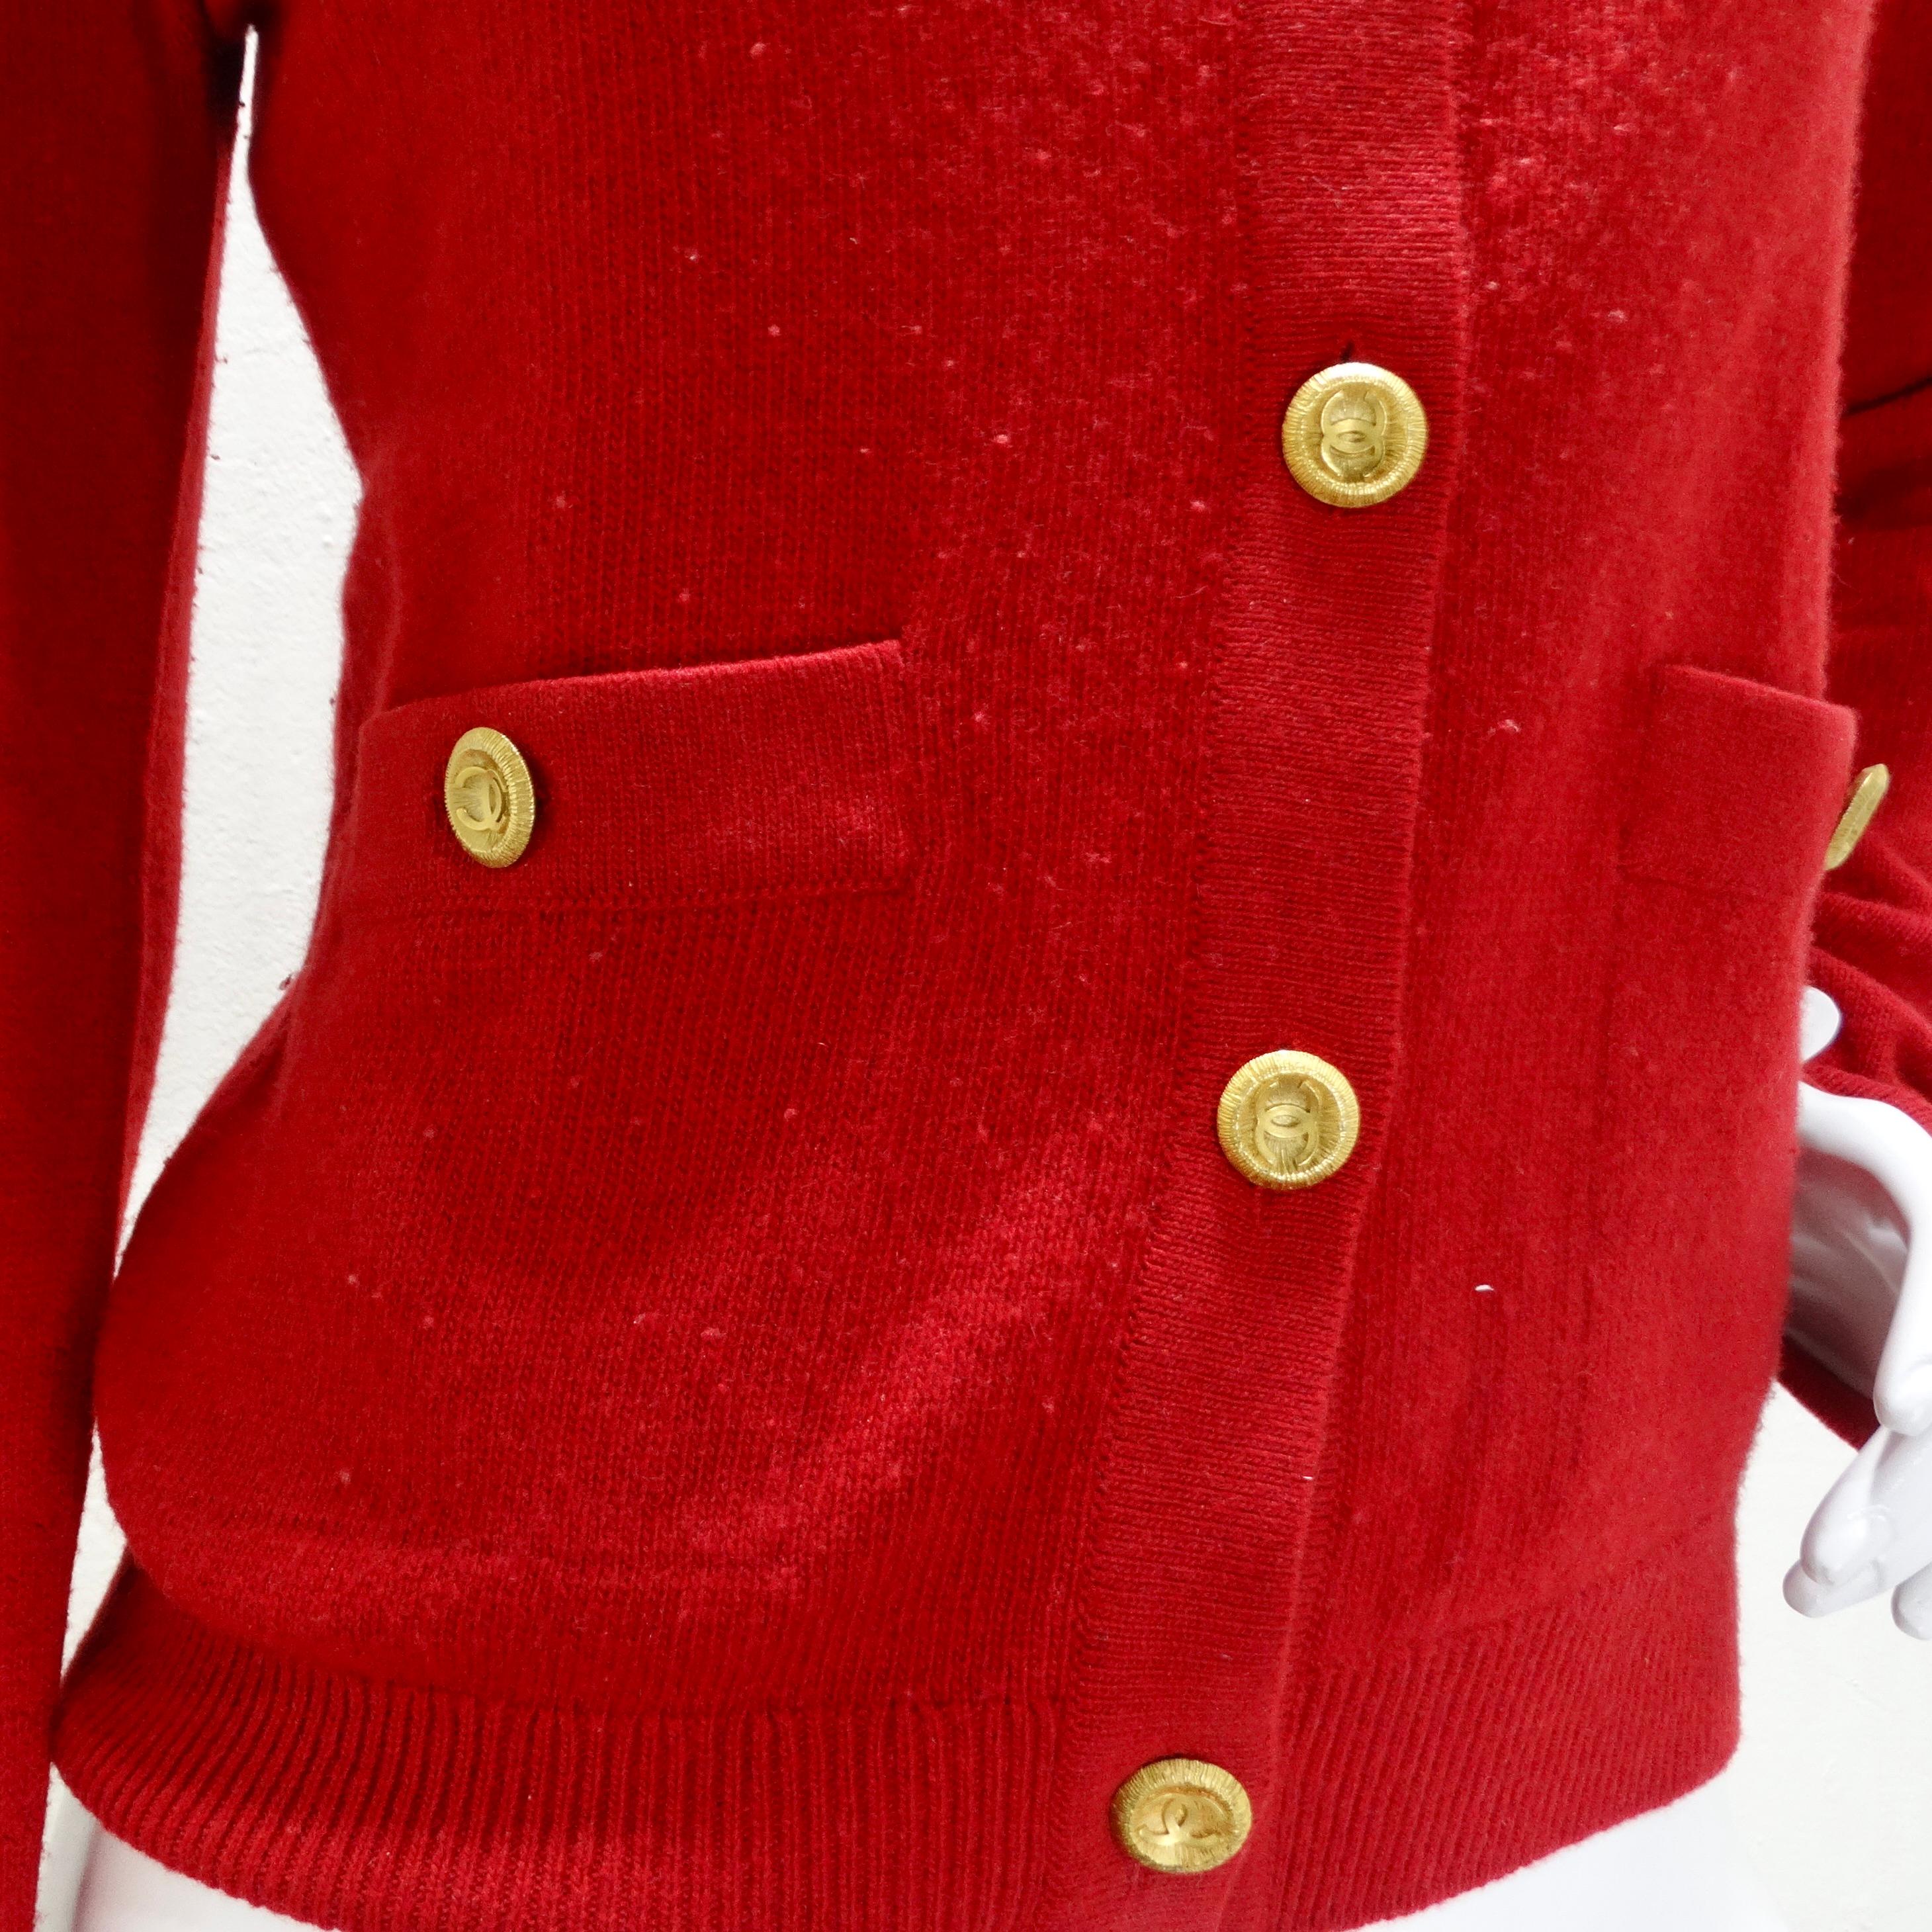 Chanel 90s Red Cashmere Cardigan In Excellent Condition For Sale In Scottsdale, AZ